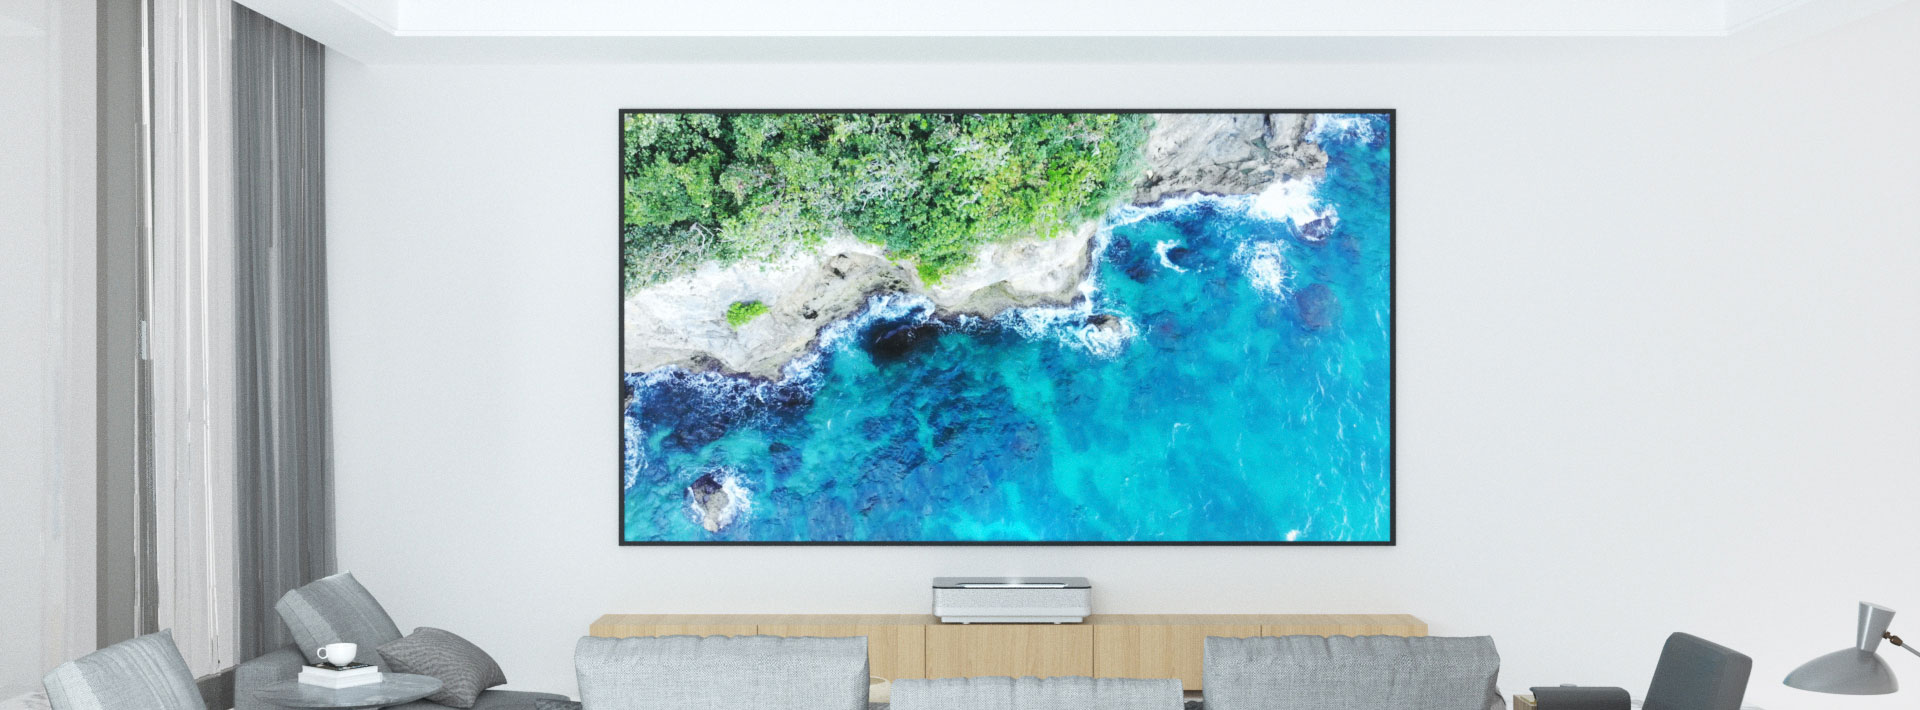 Home Theater 4K 